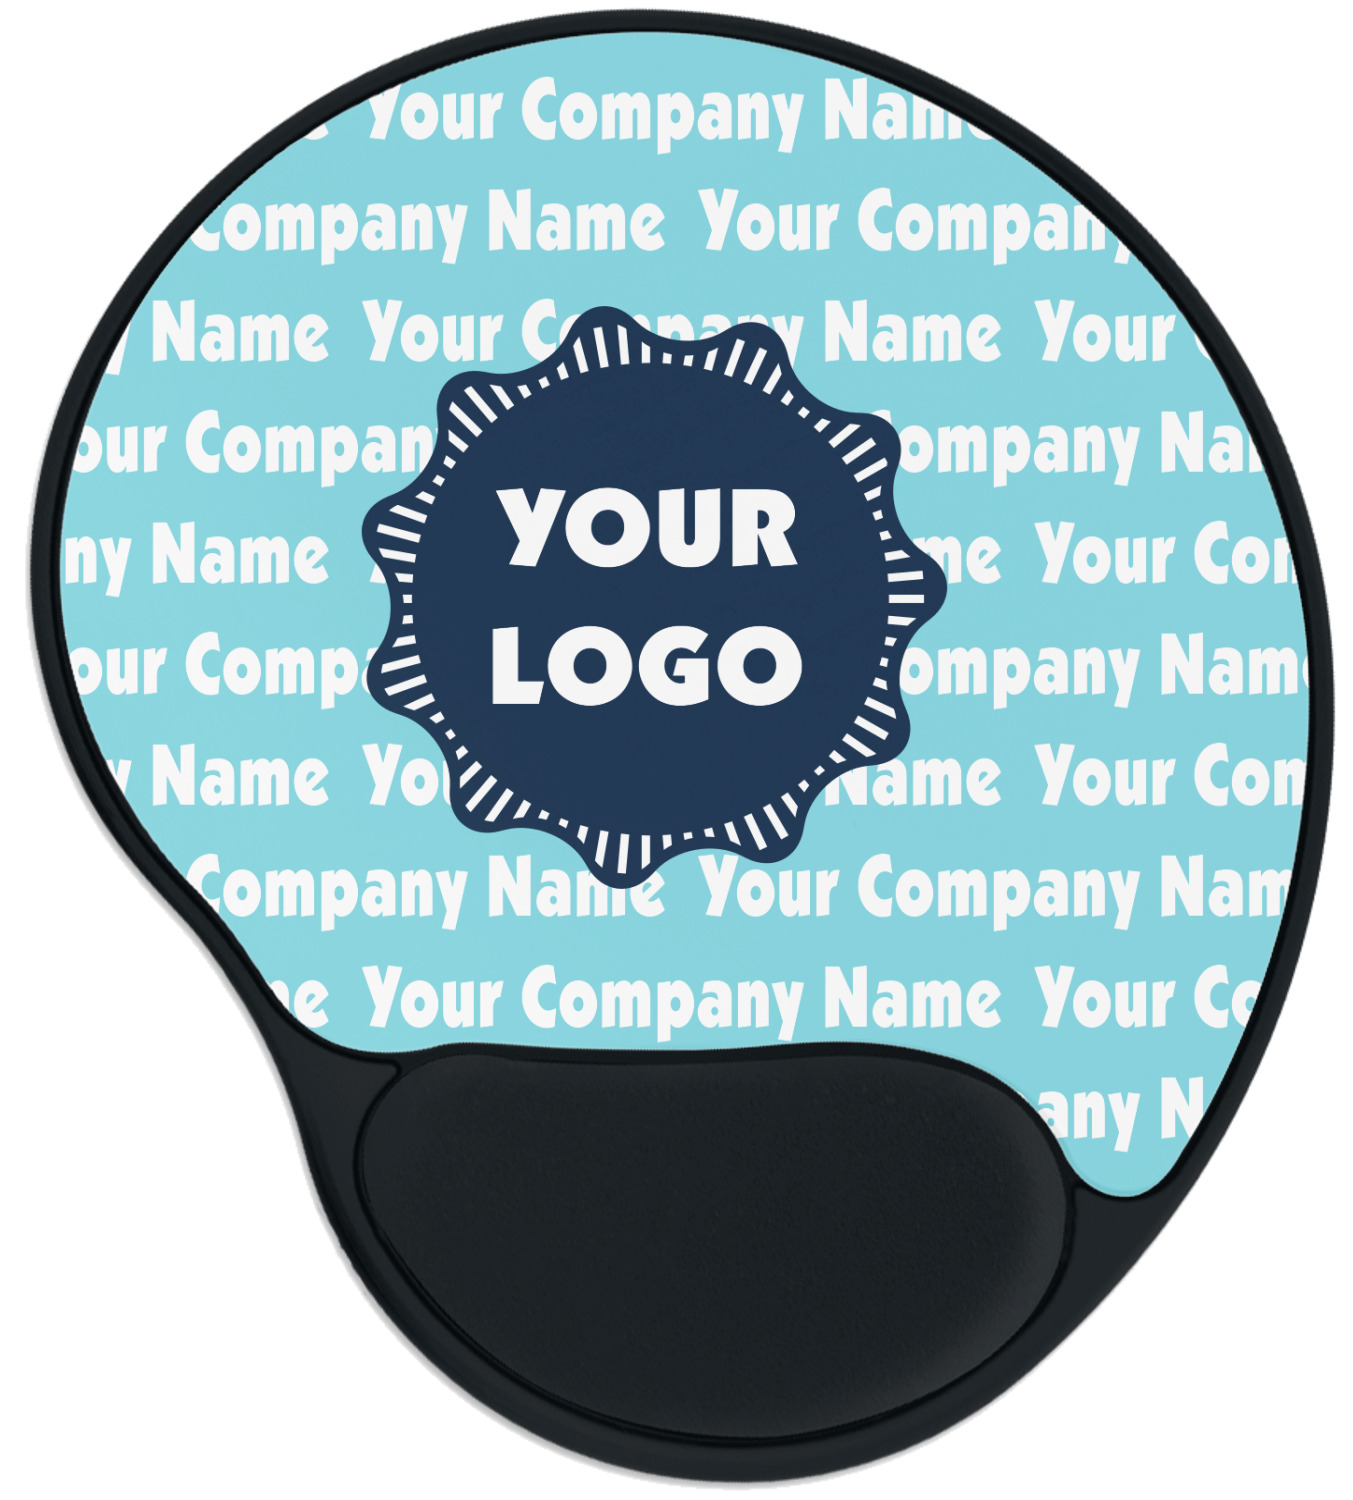 https://www.youcustomizeit.com/common/MAKE/638421/Logo-Company-Name-Mouse-Pad-with-Wrist-Support-Main.jpg?lm=1686953203